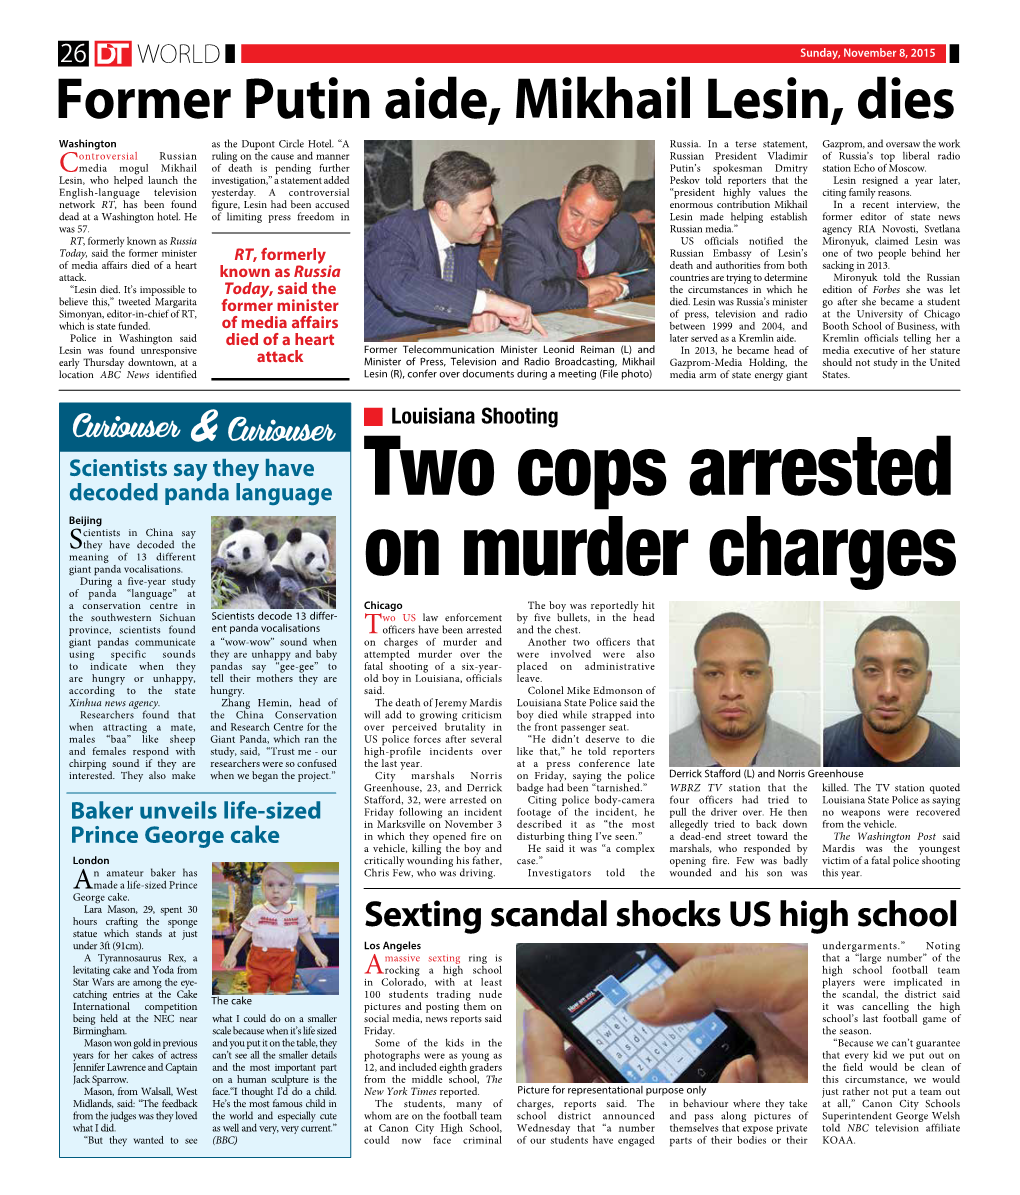 Two Cops Arrested on Murder Charges